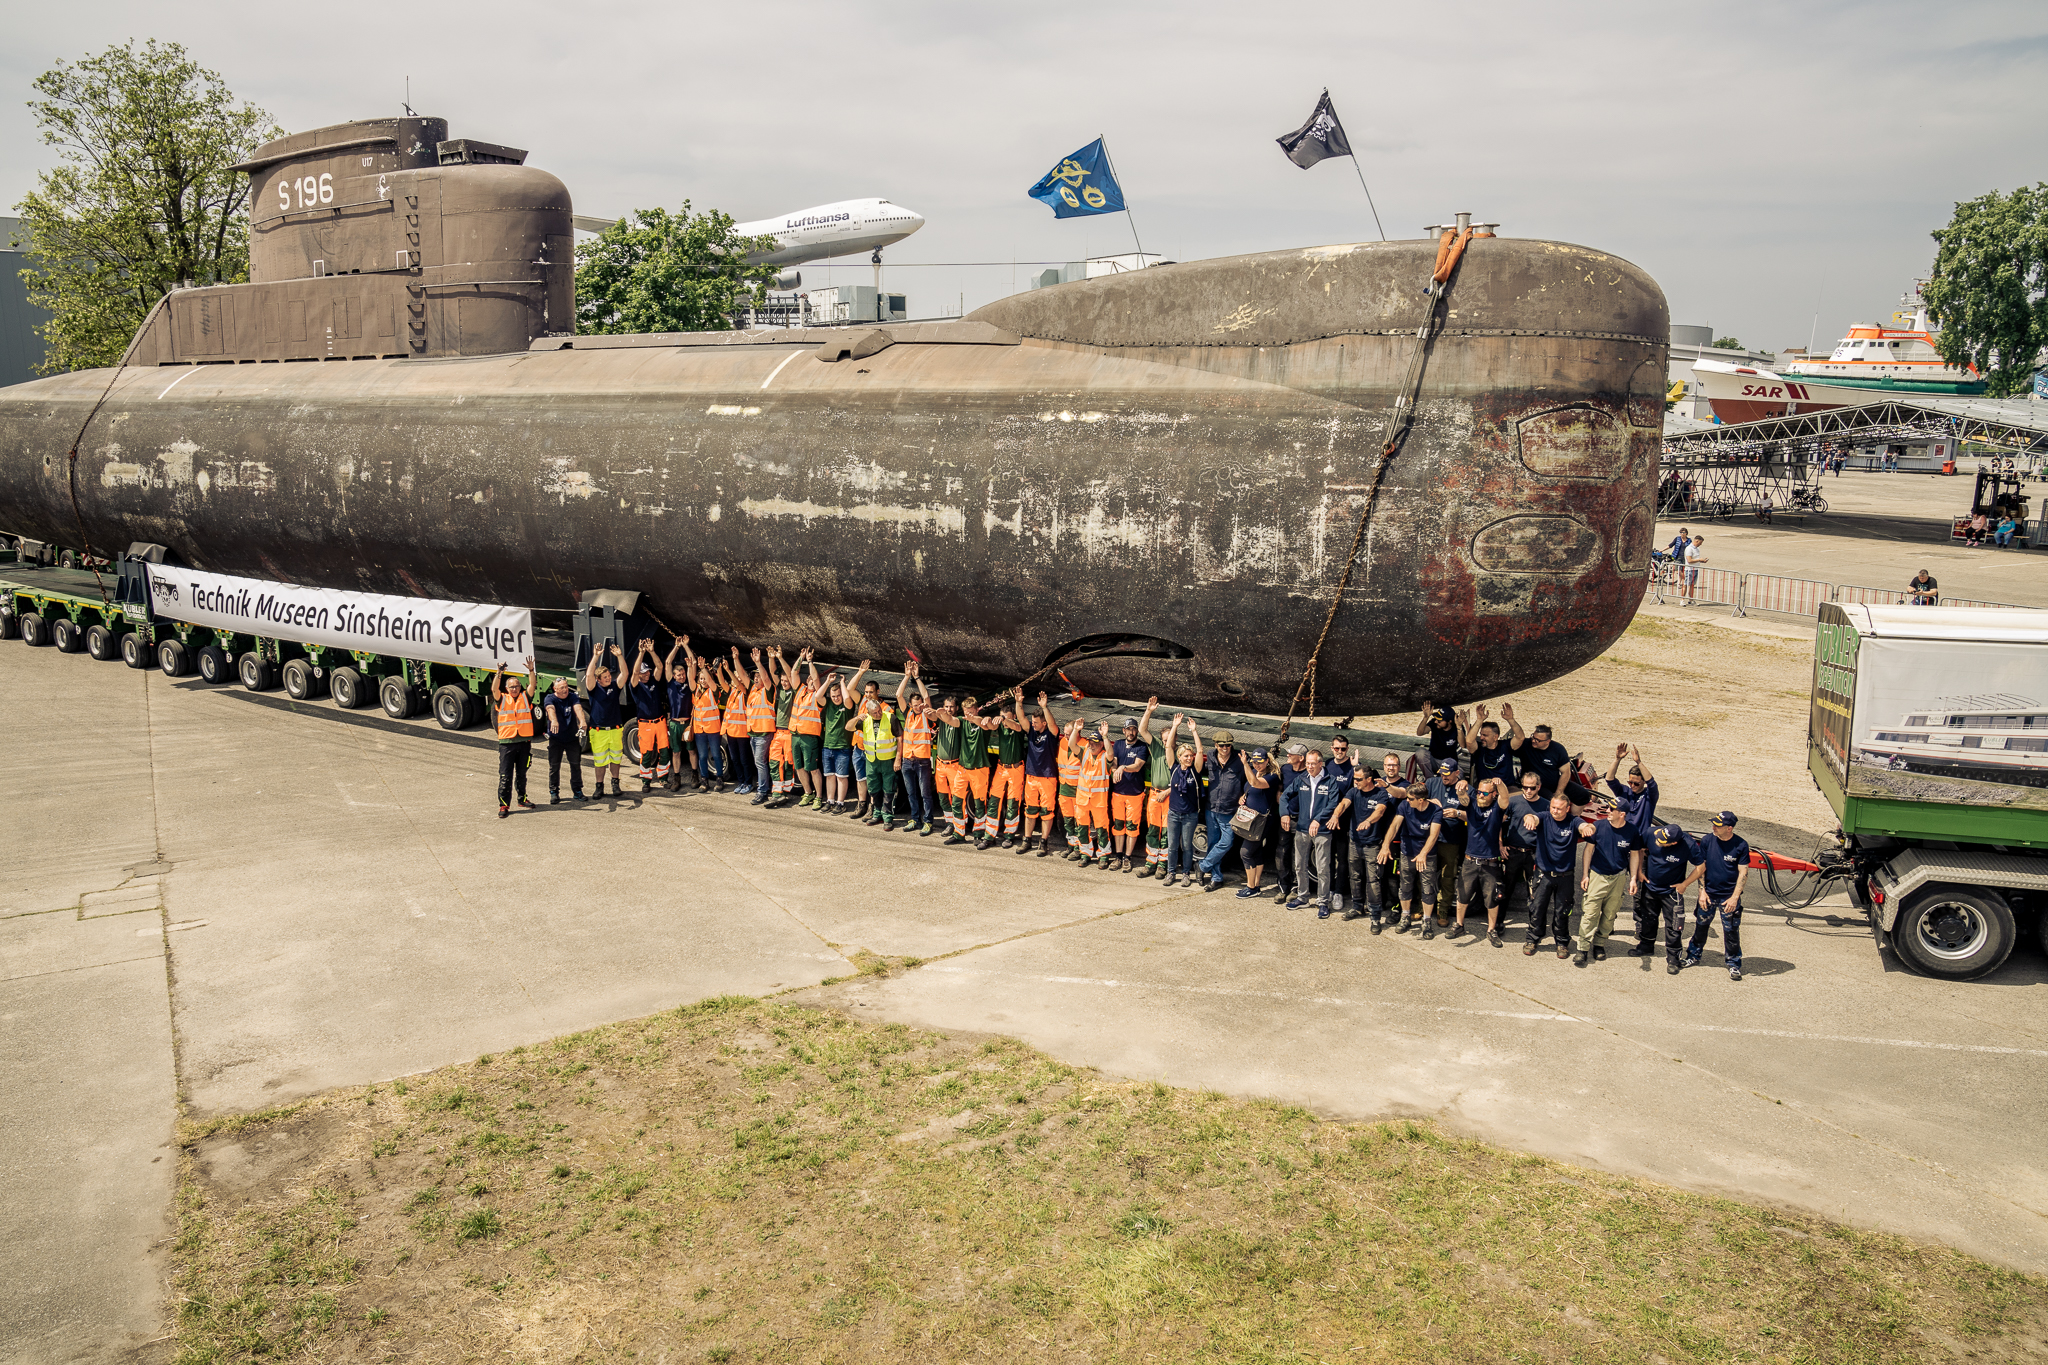 After a three-hour journey, the submarine dropped anchor in its temporary home.